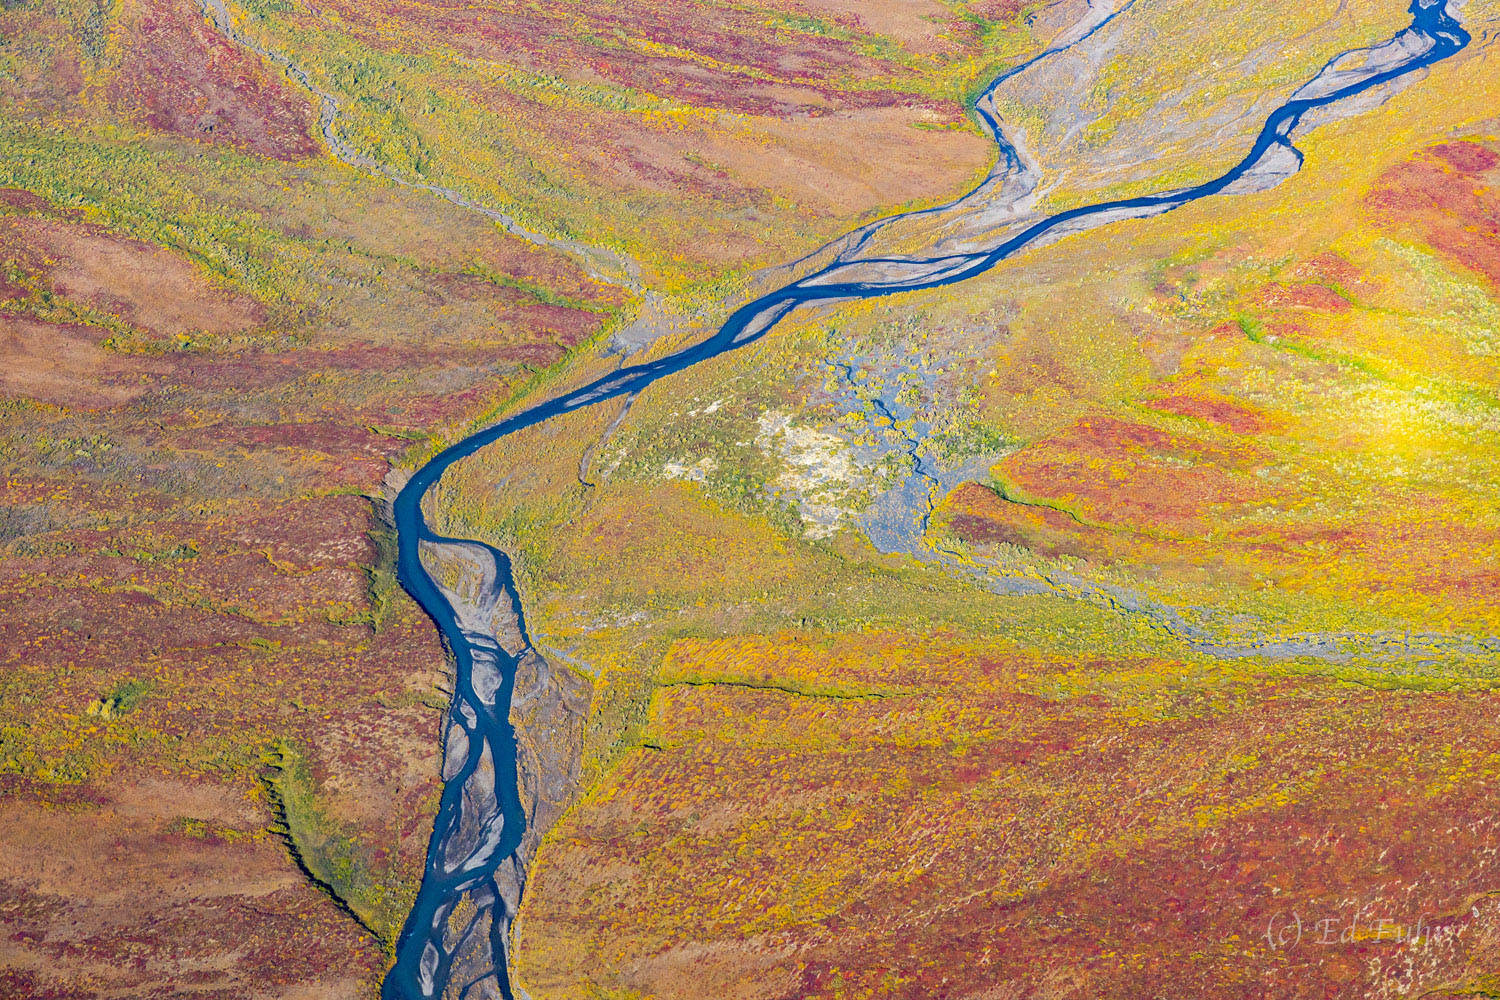 There is no better vantage to appreciate the twists and turns, interconnectedness and abstract beauty of Denali's rivers than...